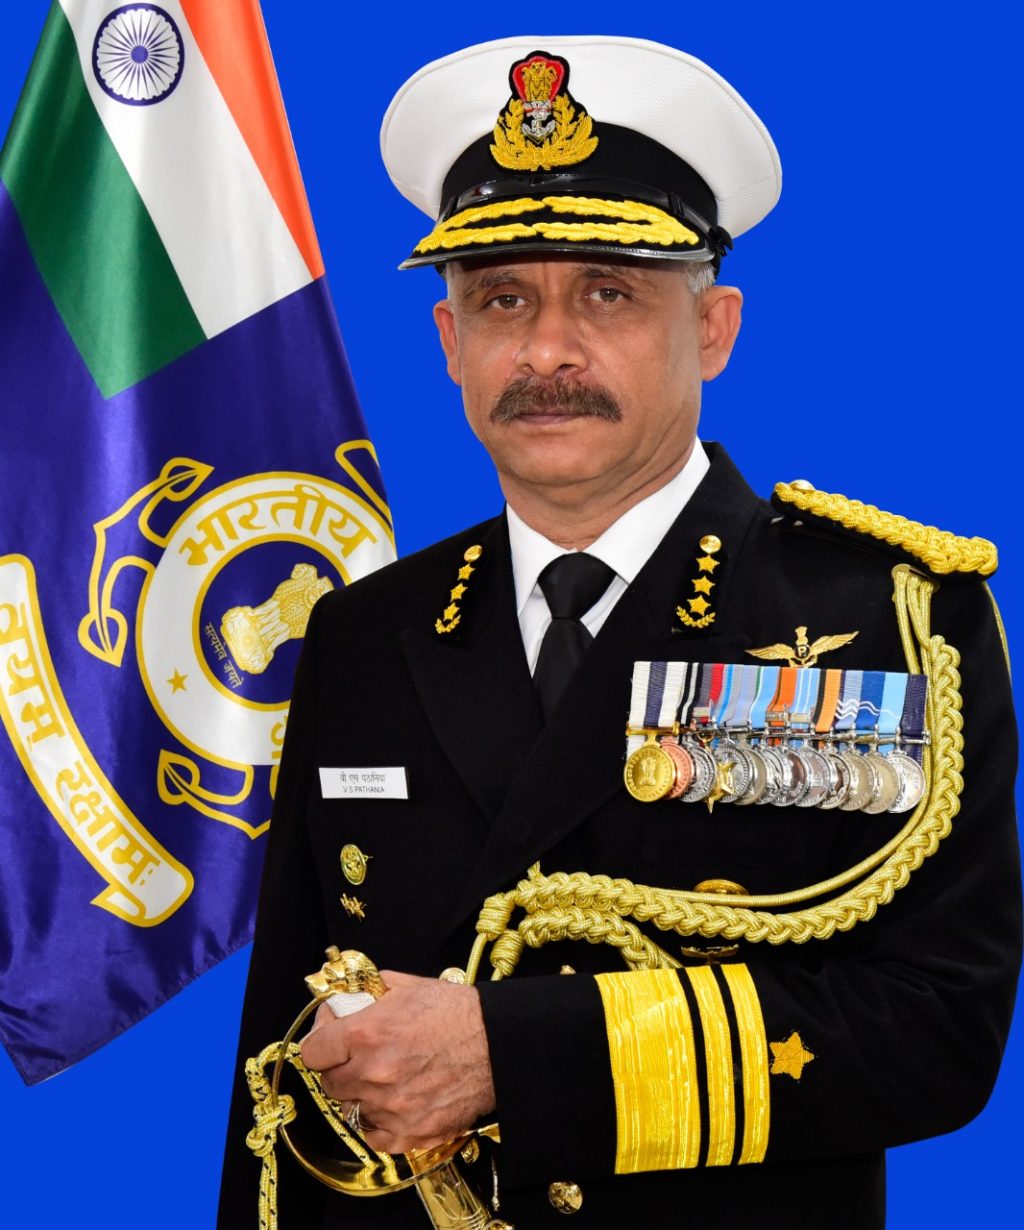 V.S. Pathania is new DG of Indian Coast Guard